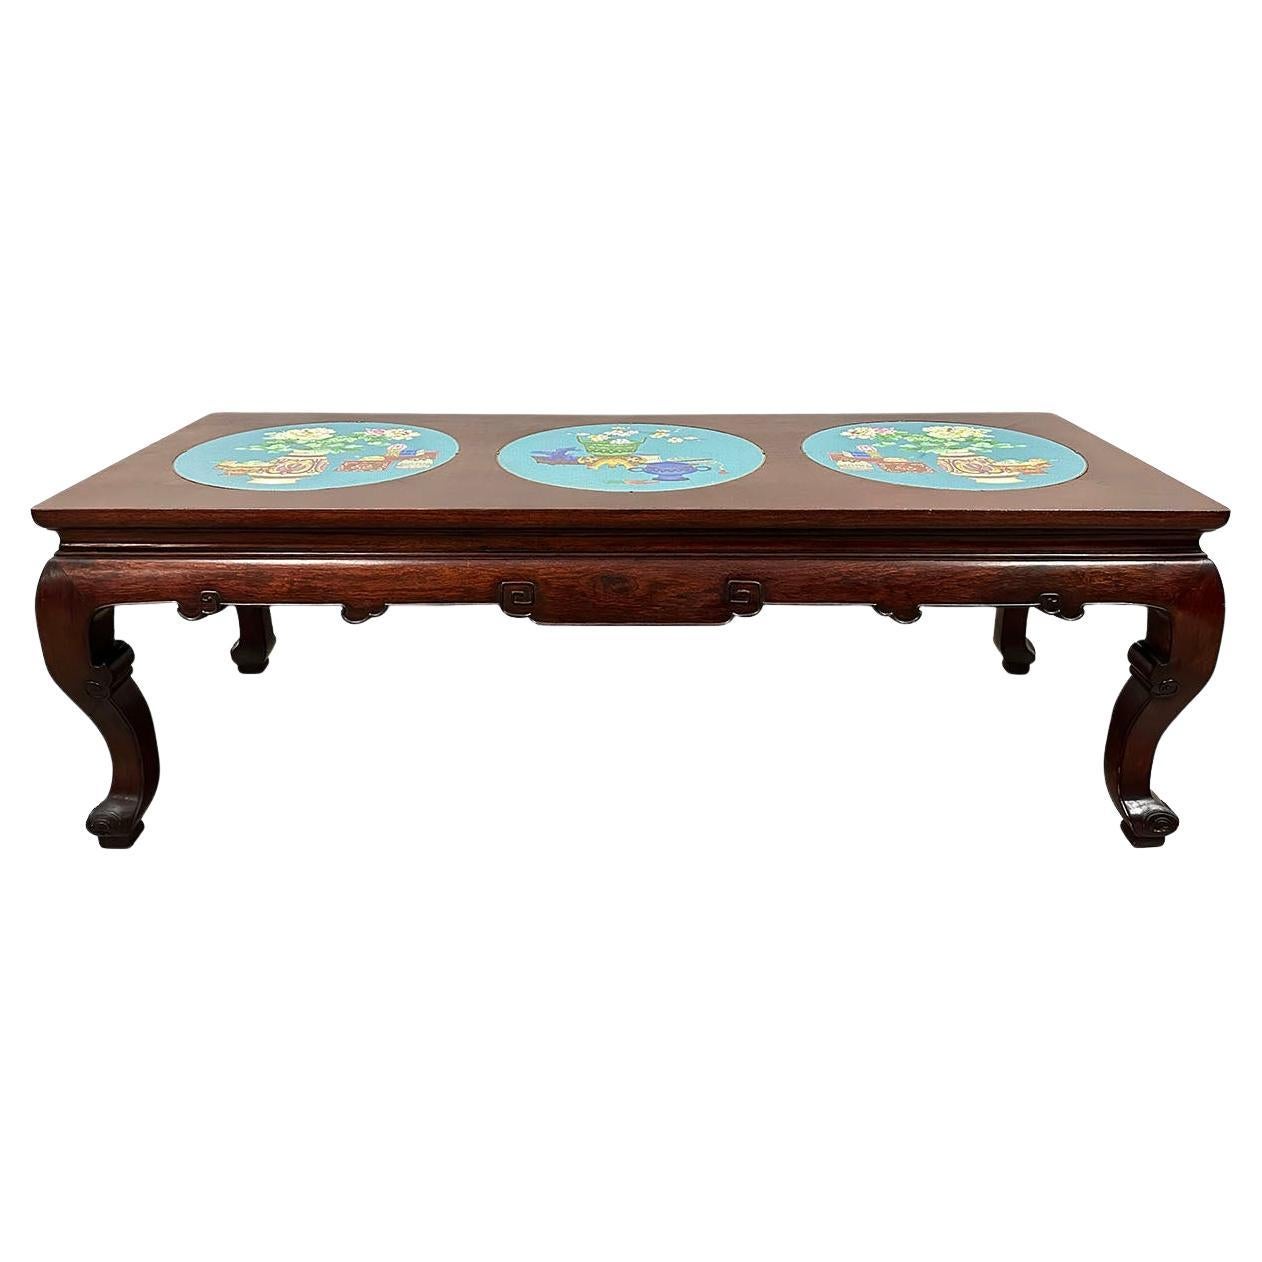 Early 20th Century Chinese Carved Hardwood Coffee Table With Cloisonne Inlay on  For Sale